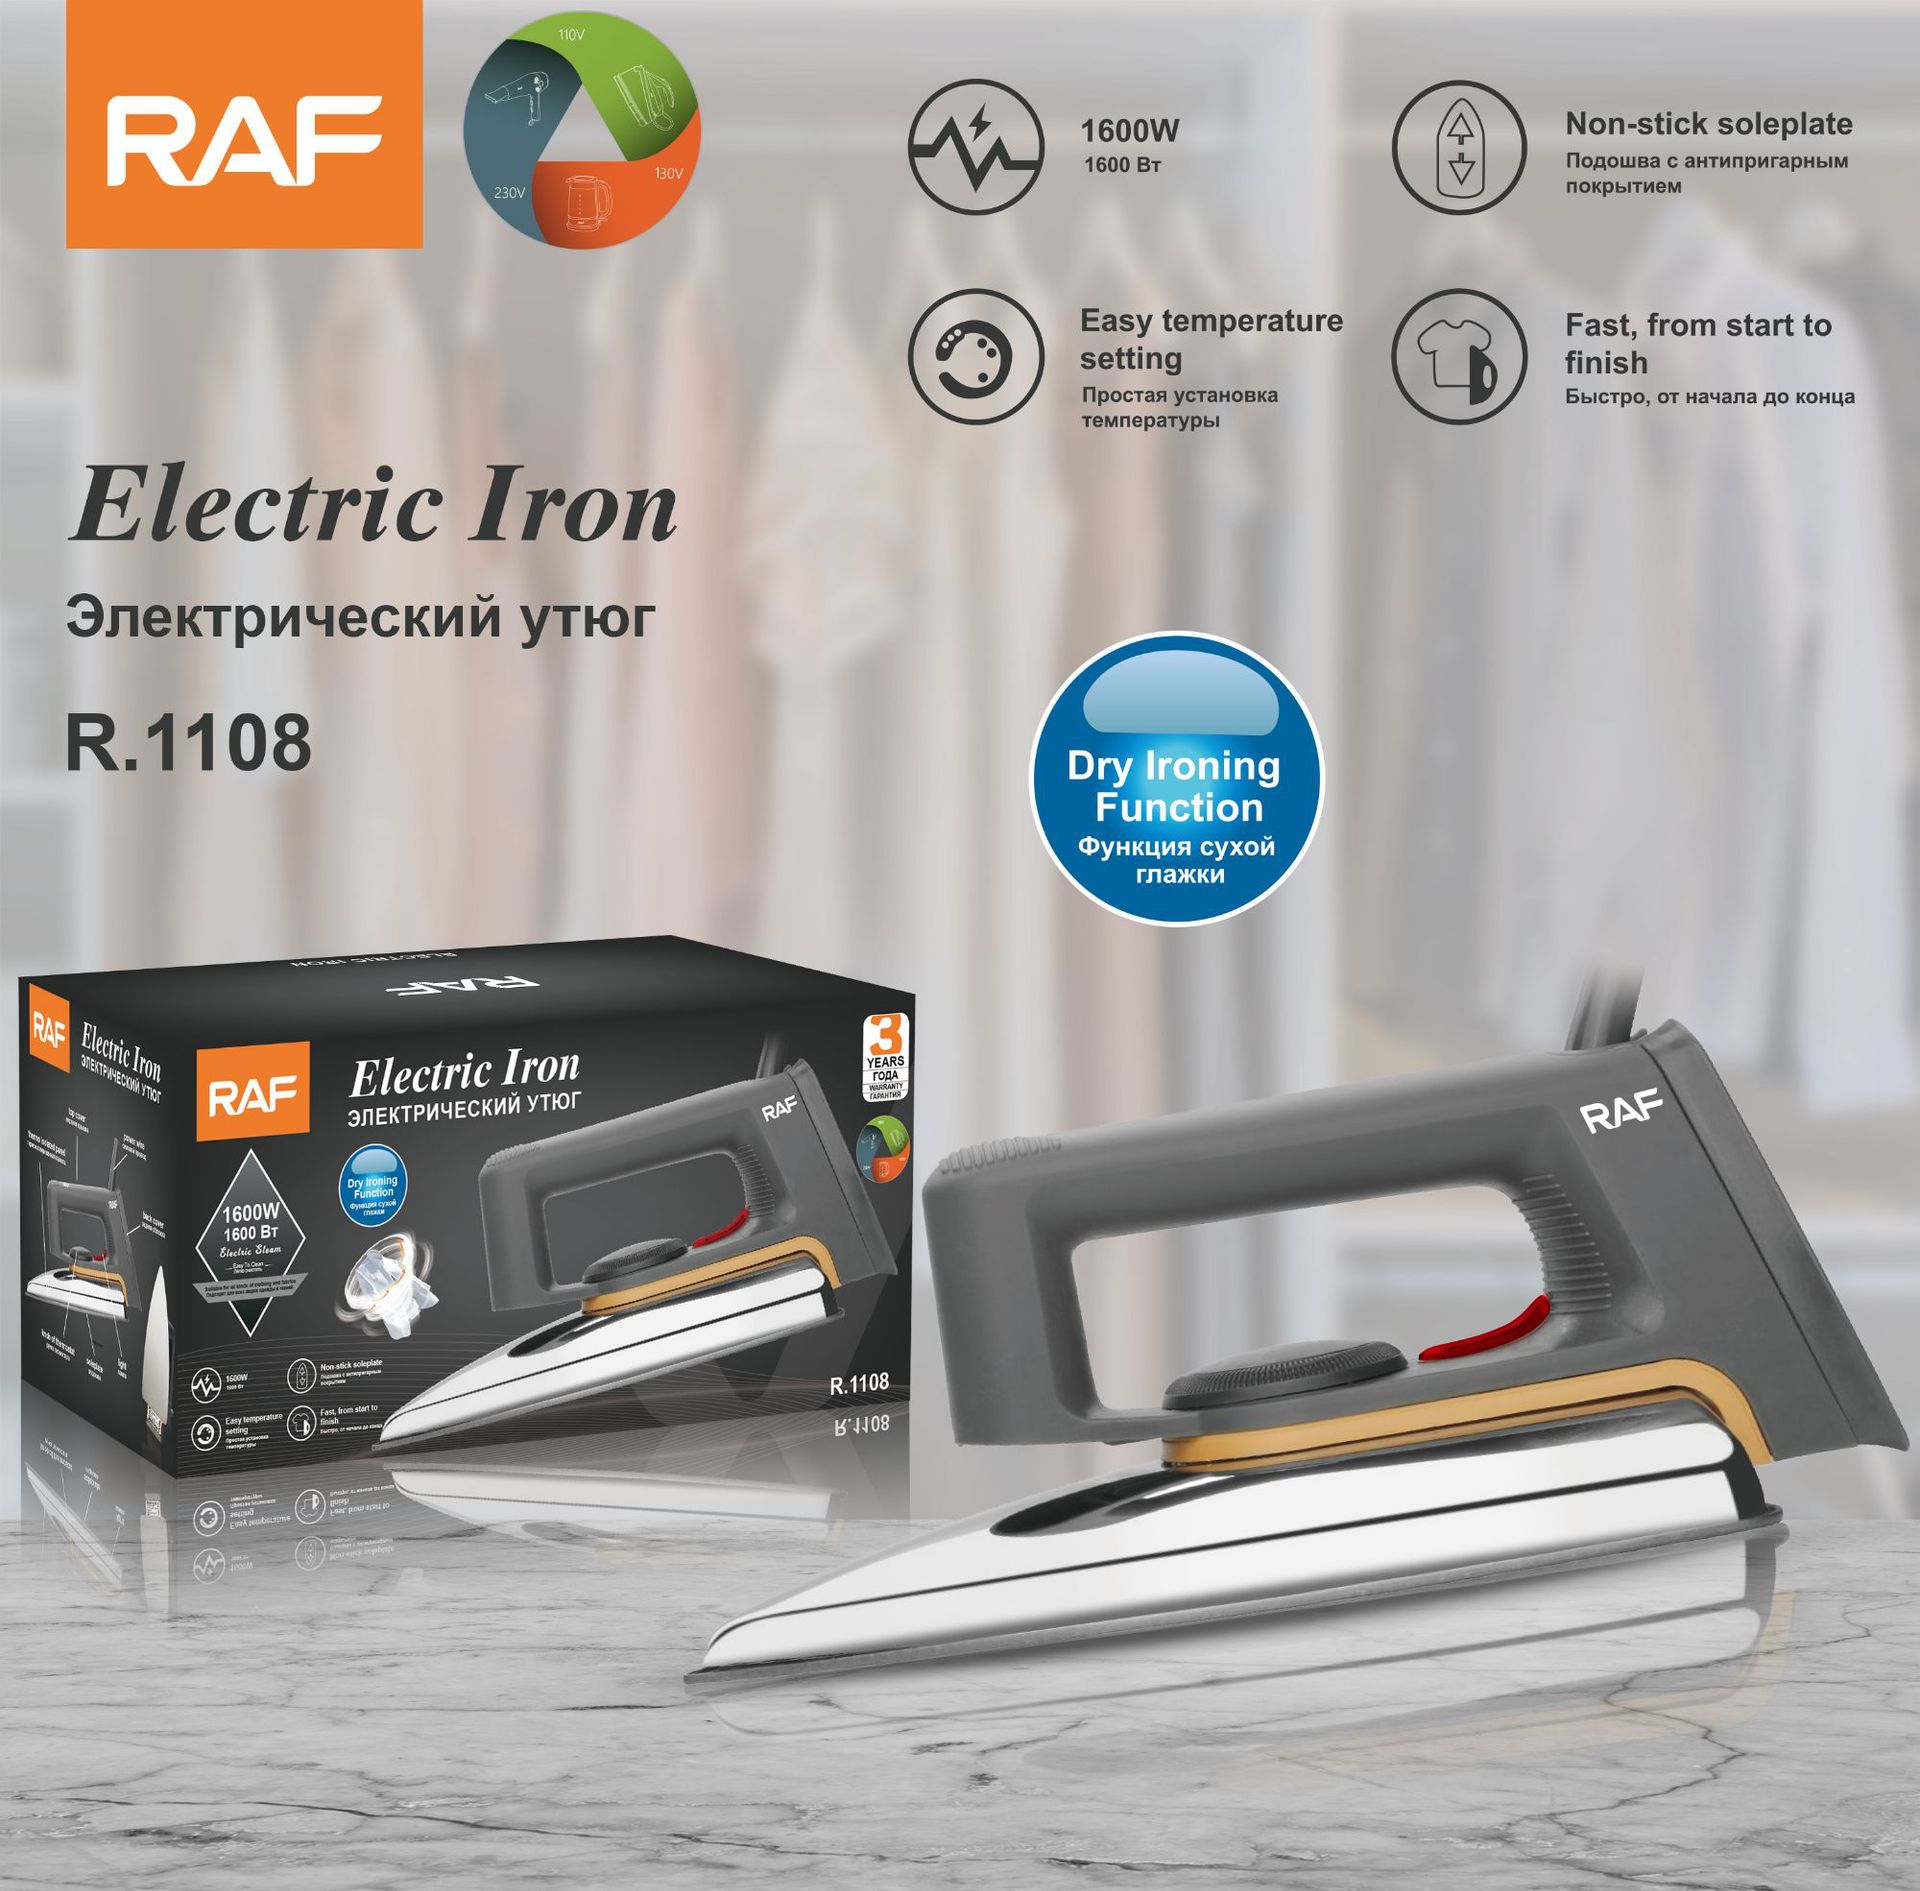 RAF R.1108 Electric Iron with Stainless Steel Bottom Plate and 3 Temperature Gears Powerful 1600W Iron for Perfectly Pressed Clothes